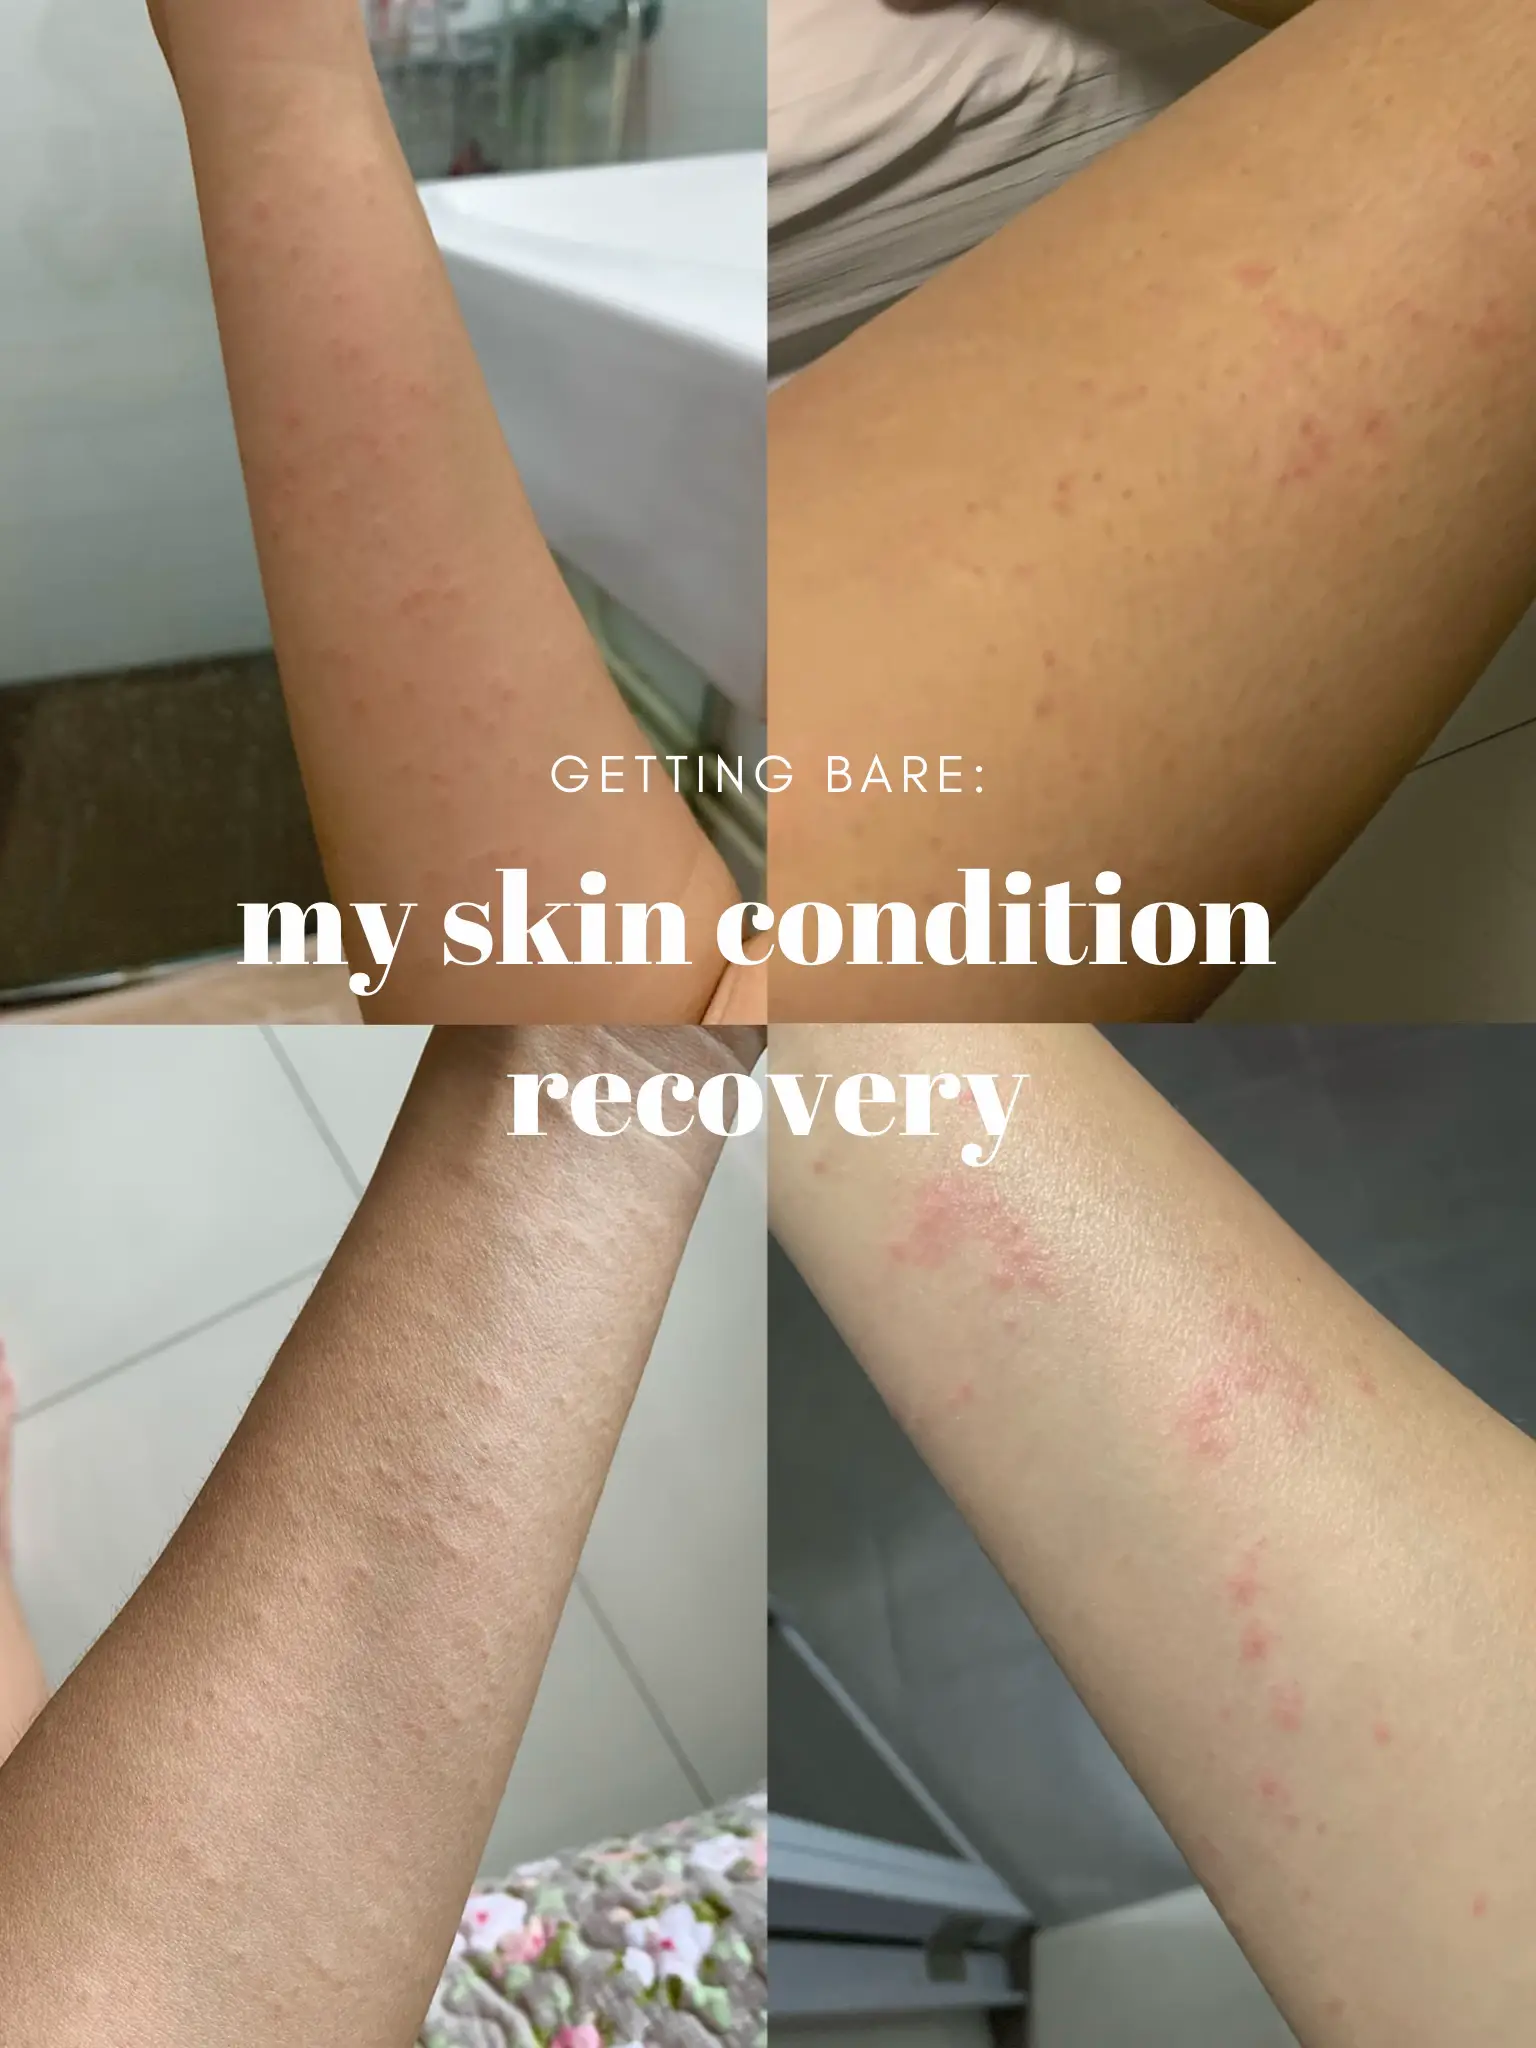 the product that helped my hives/ eczema journey 's images(0)